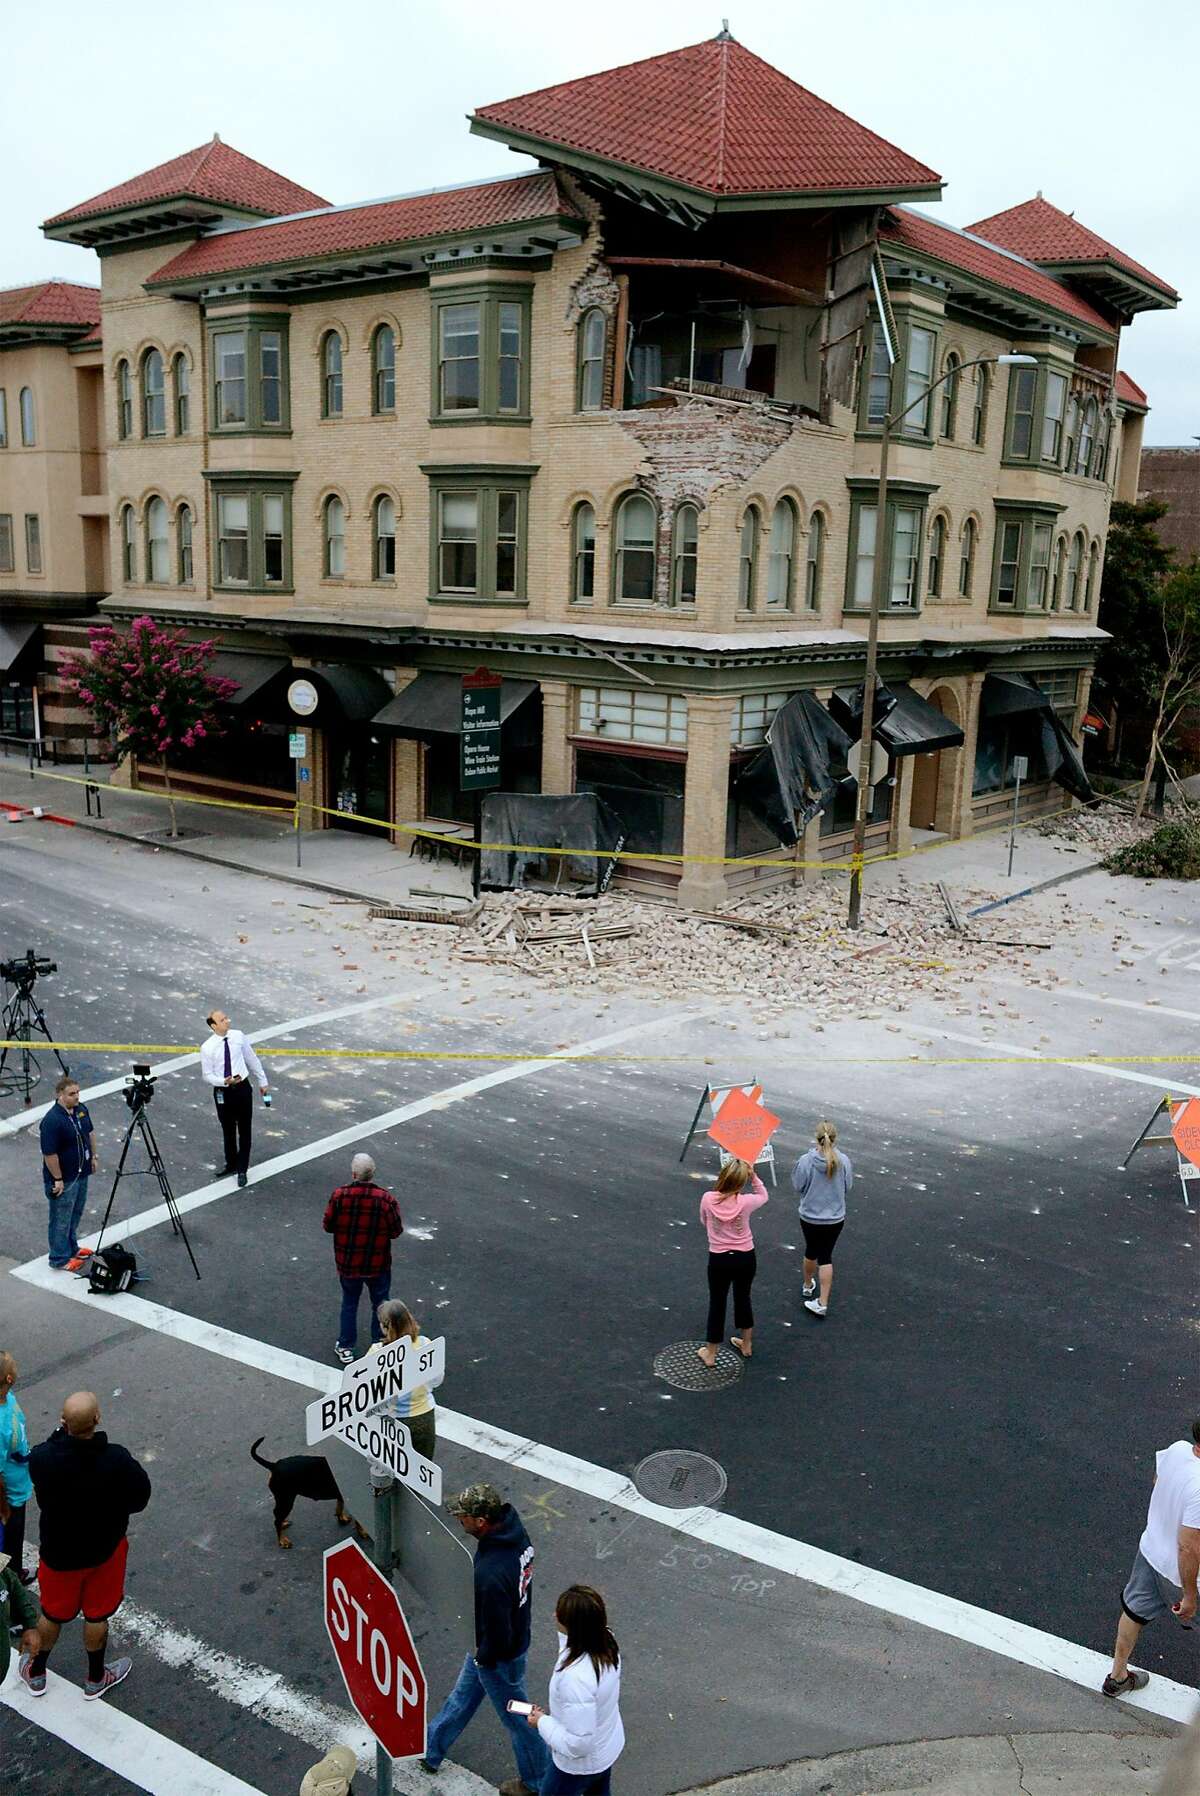 Spectators survey the damage to a building at the corner of Brown Street and Second Street in Napa, California, after an earthquake measuring 6.0 on the Richter scale struck in the early morning of August 24, 2014.